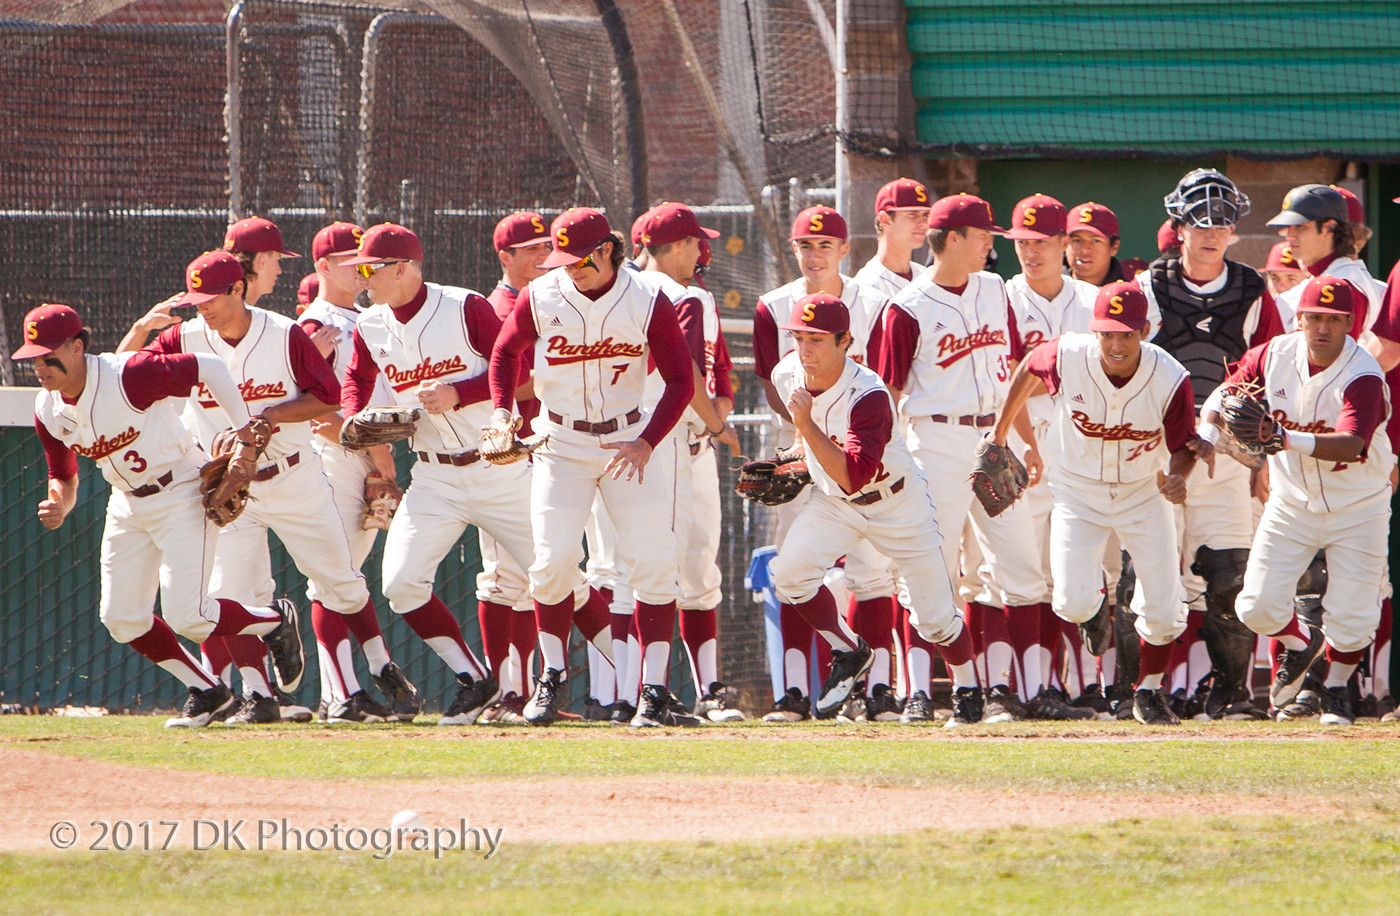 Baseball is seeded #4 and hosts #13 Chabot in the Nor-Cal Regional I best-of-three series